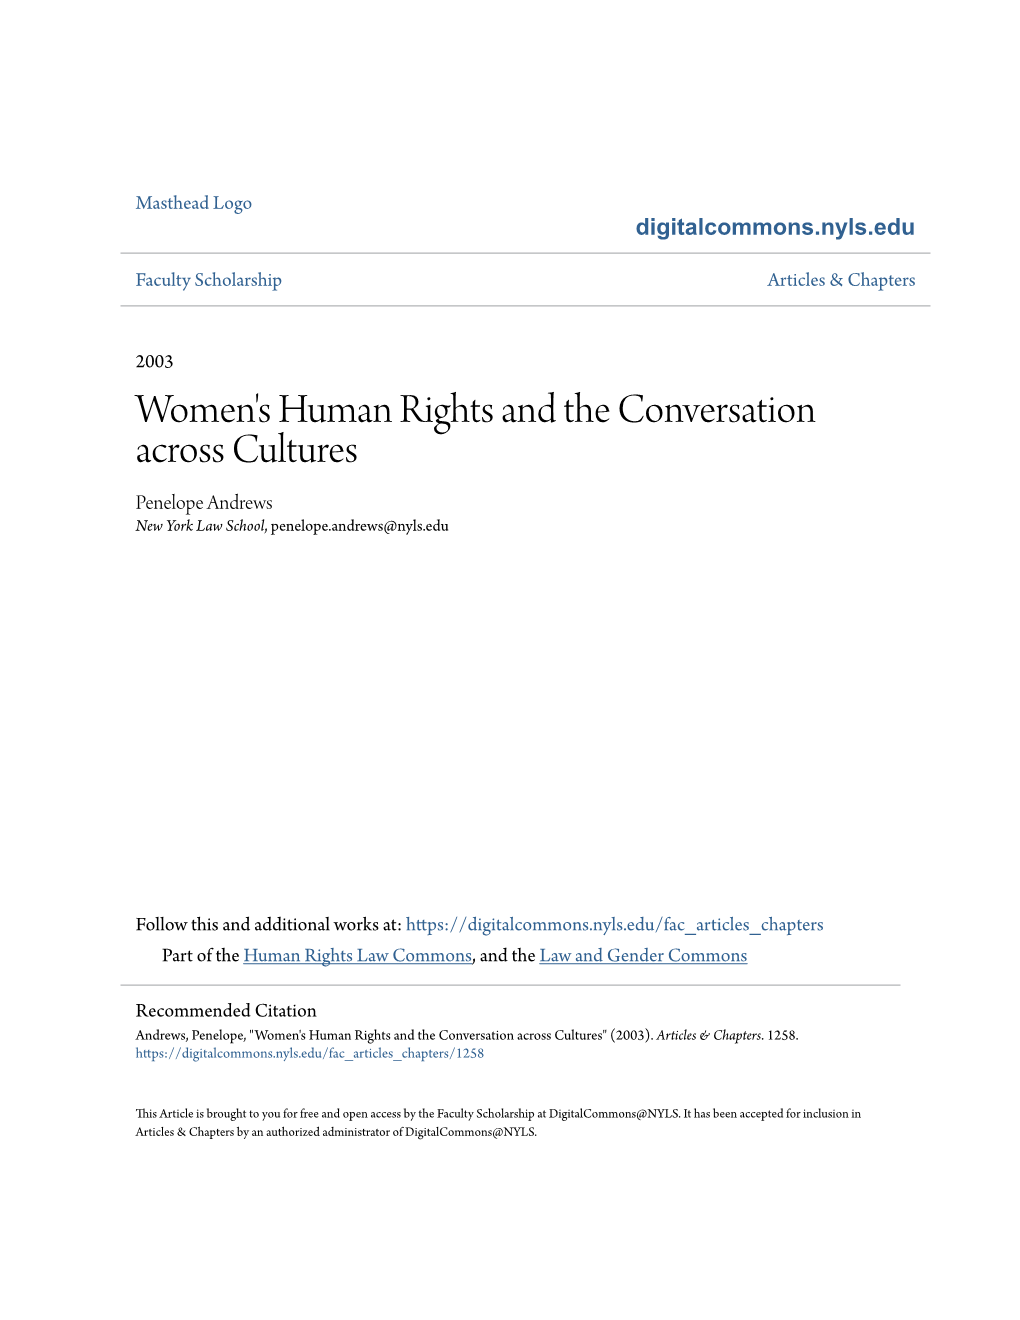 Women's Human Rights and the Conversation Across Cultures Penelope Andrews New York Law School, Penelope.Andrews@Nyls.Edu